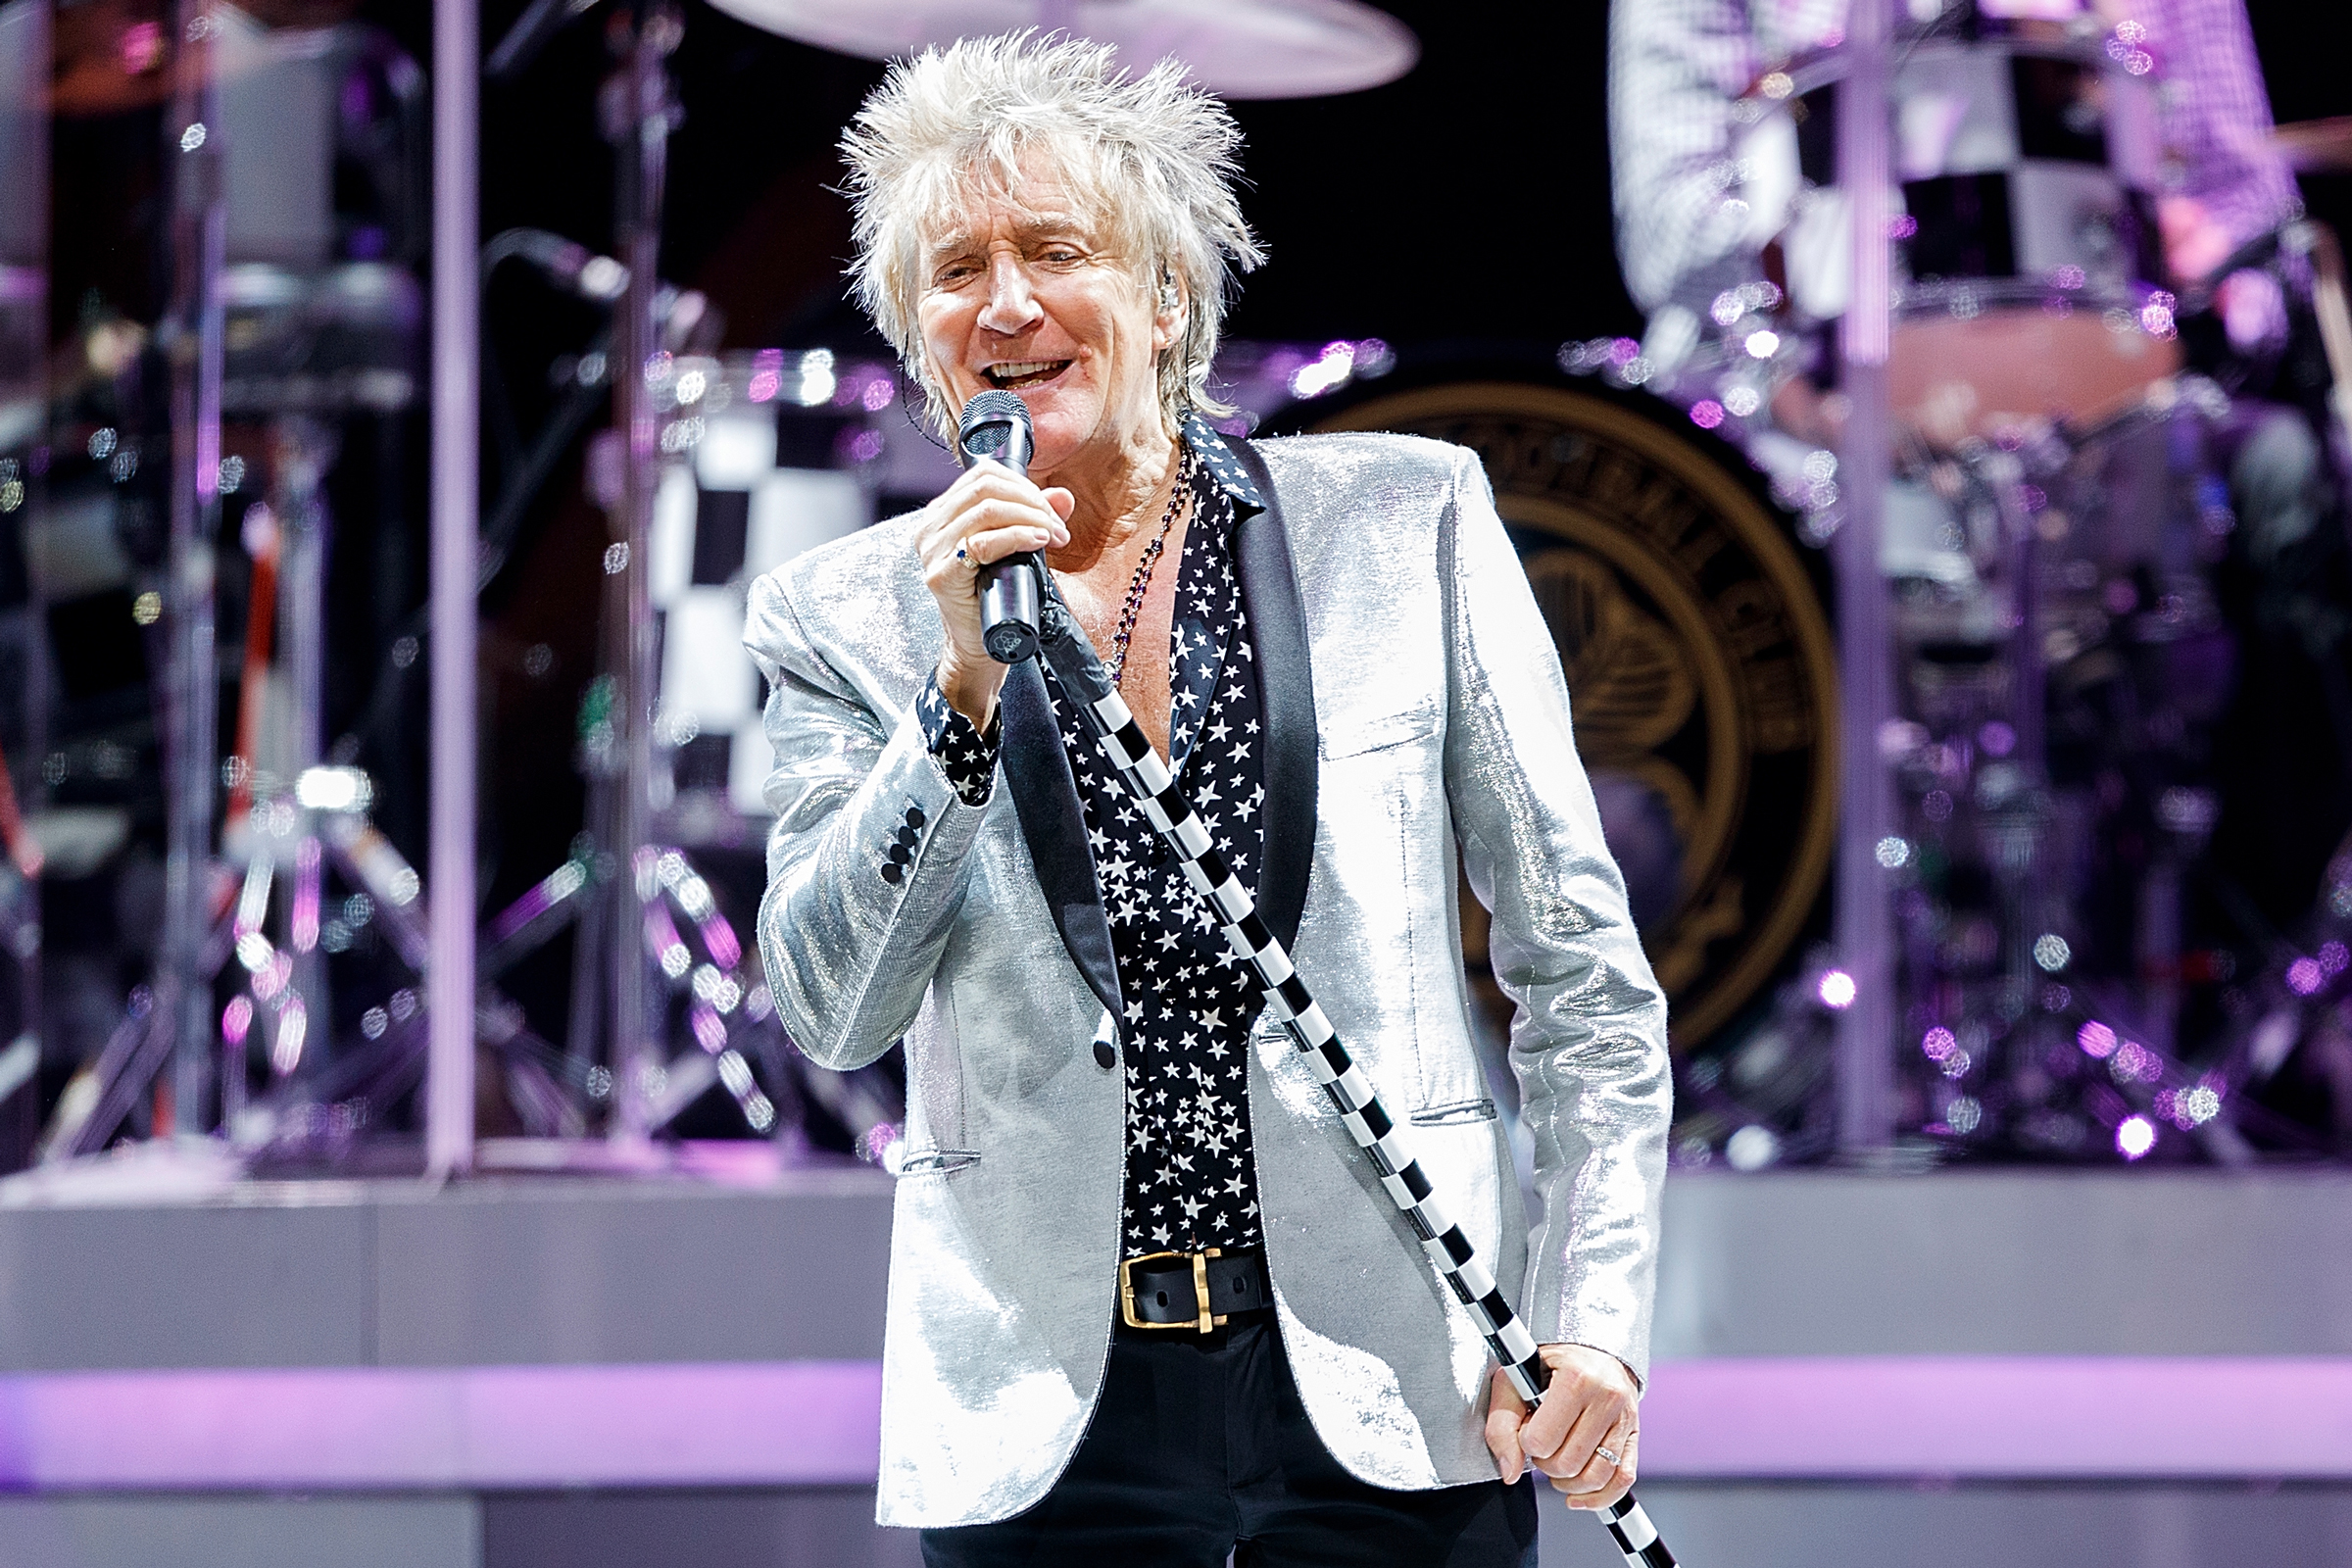 Rod Stewart declined a million dollar offer to perform at 2022 Qatar World Cup opening ceremony